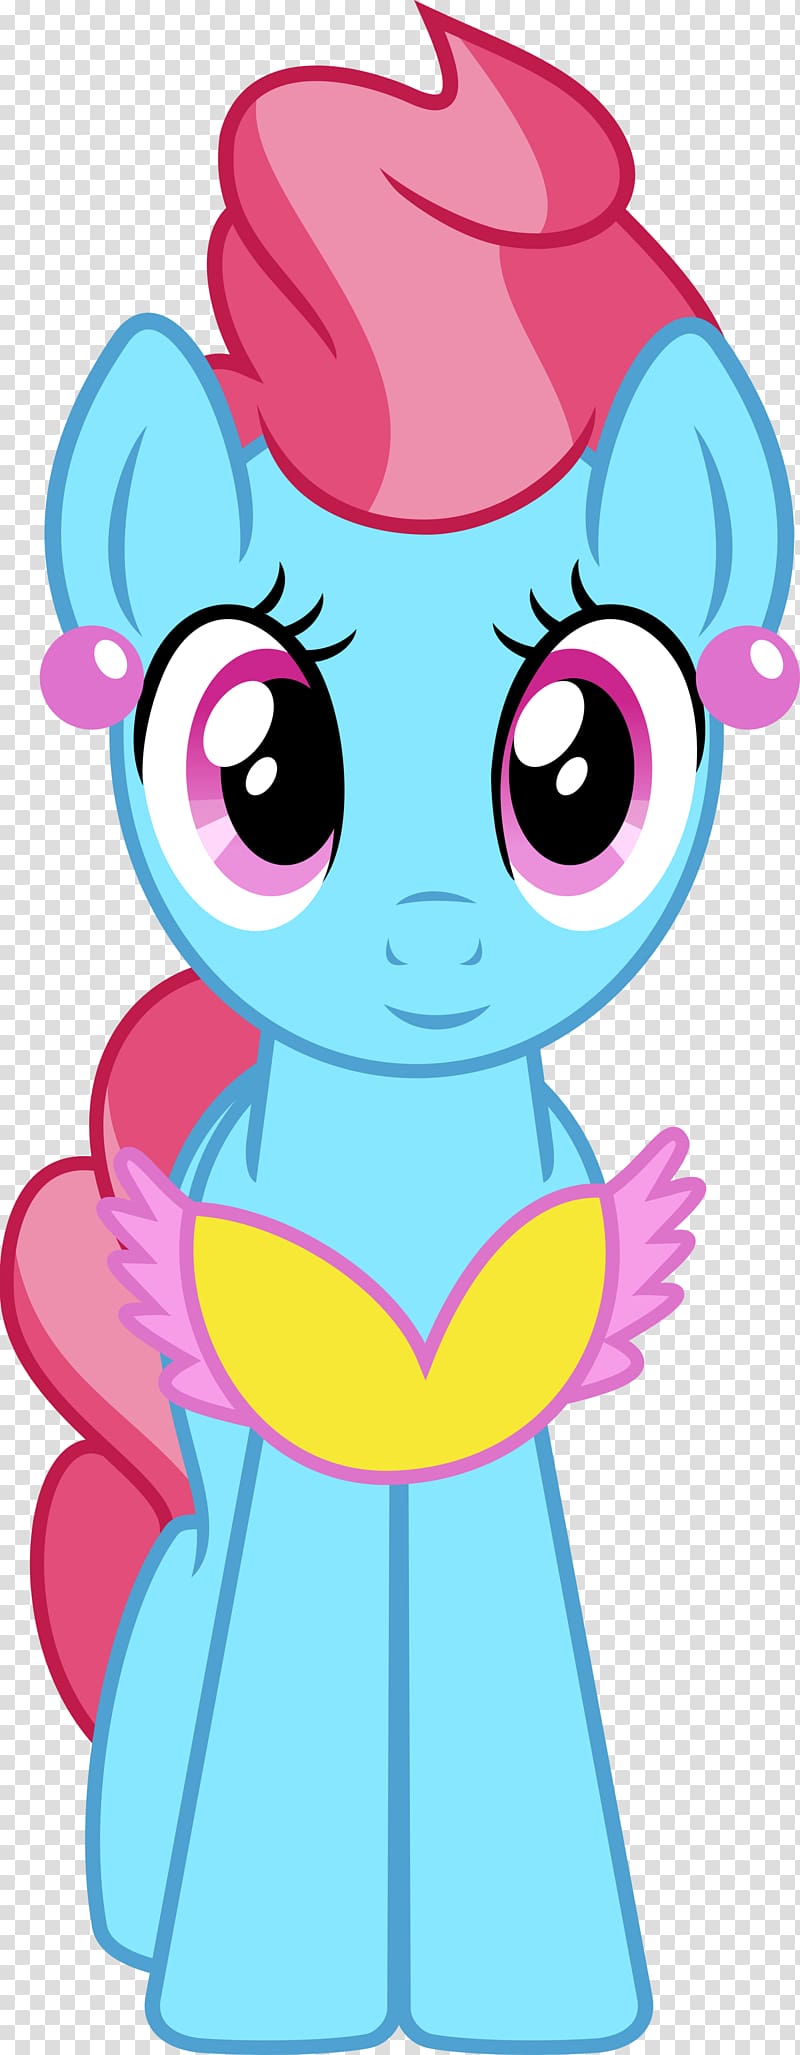 Mrs. Cup Cake Pinkie Pie Fluttershy Pony, cake transparent background PNG clipart